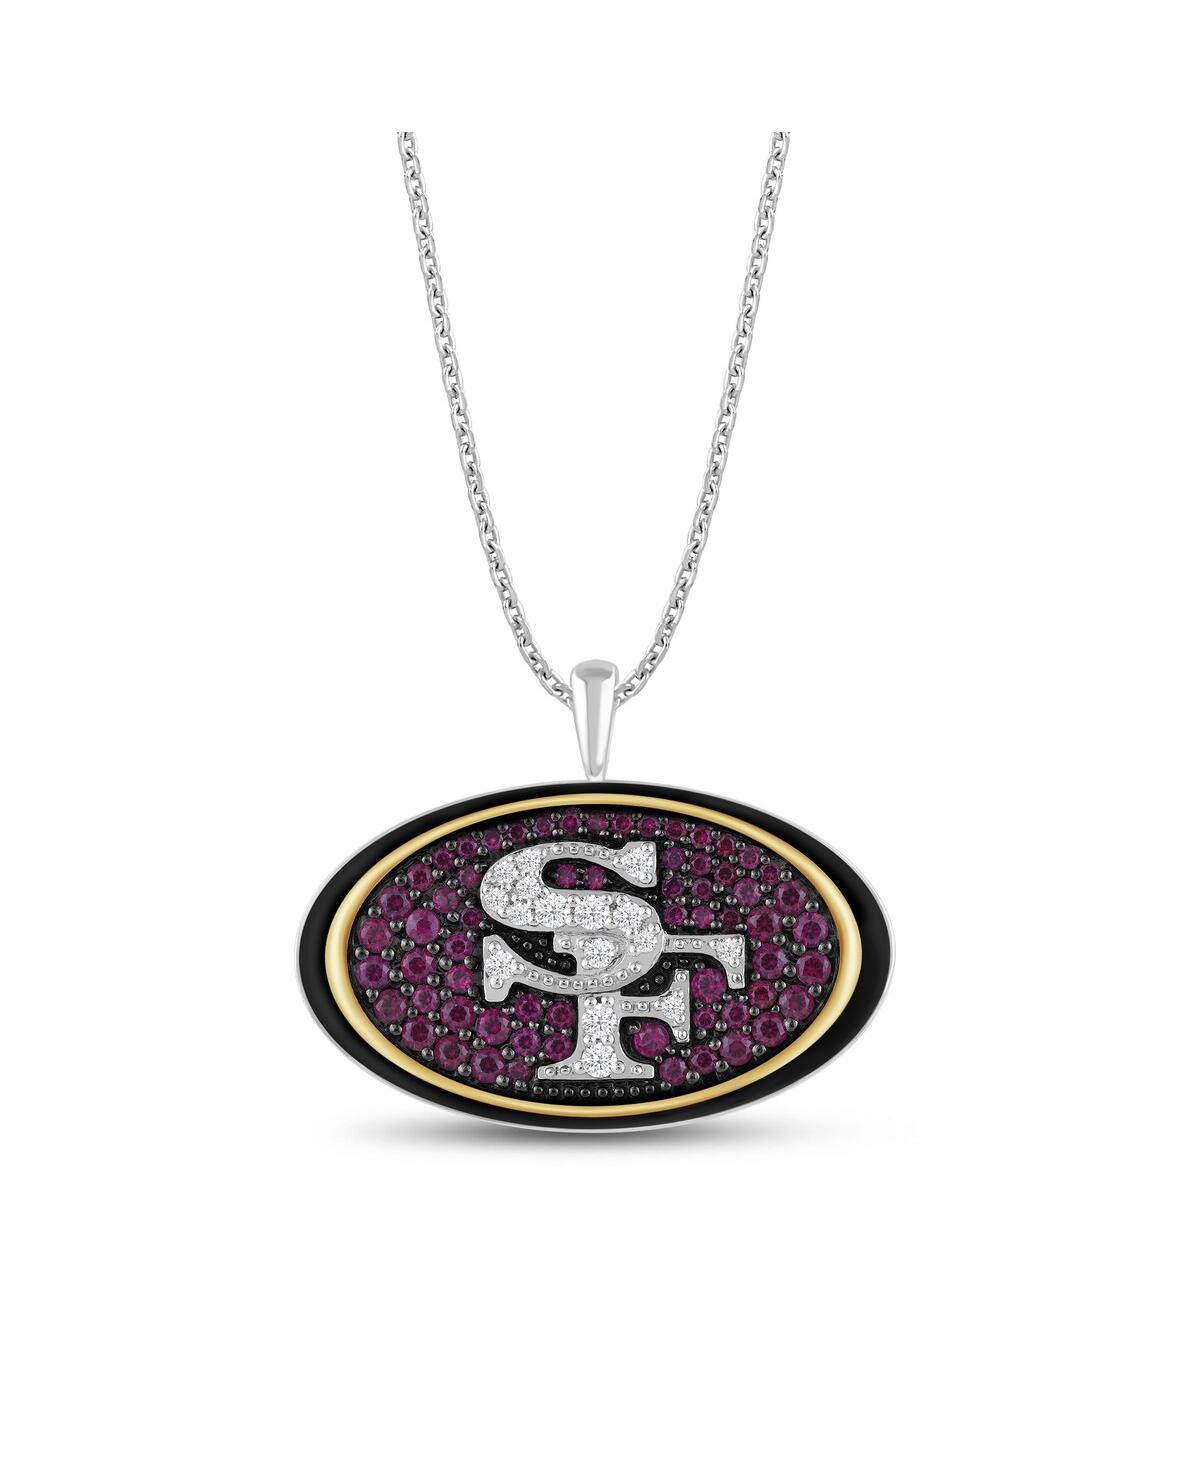 Men's and Women's San Francisco 49ers Team Necklace - Silver